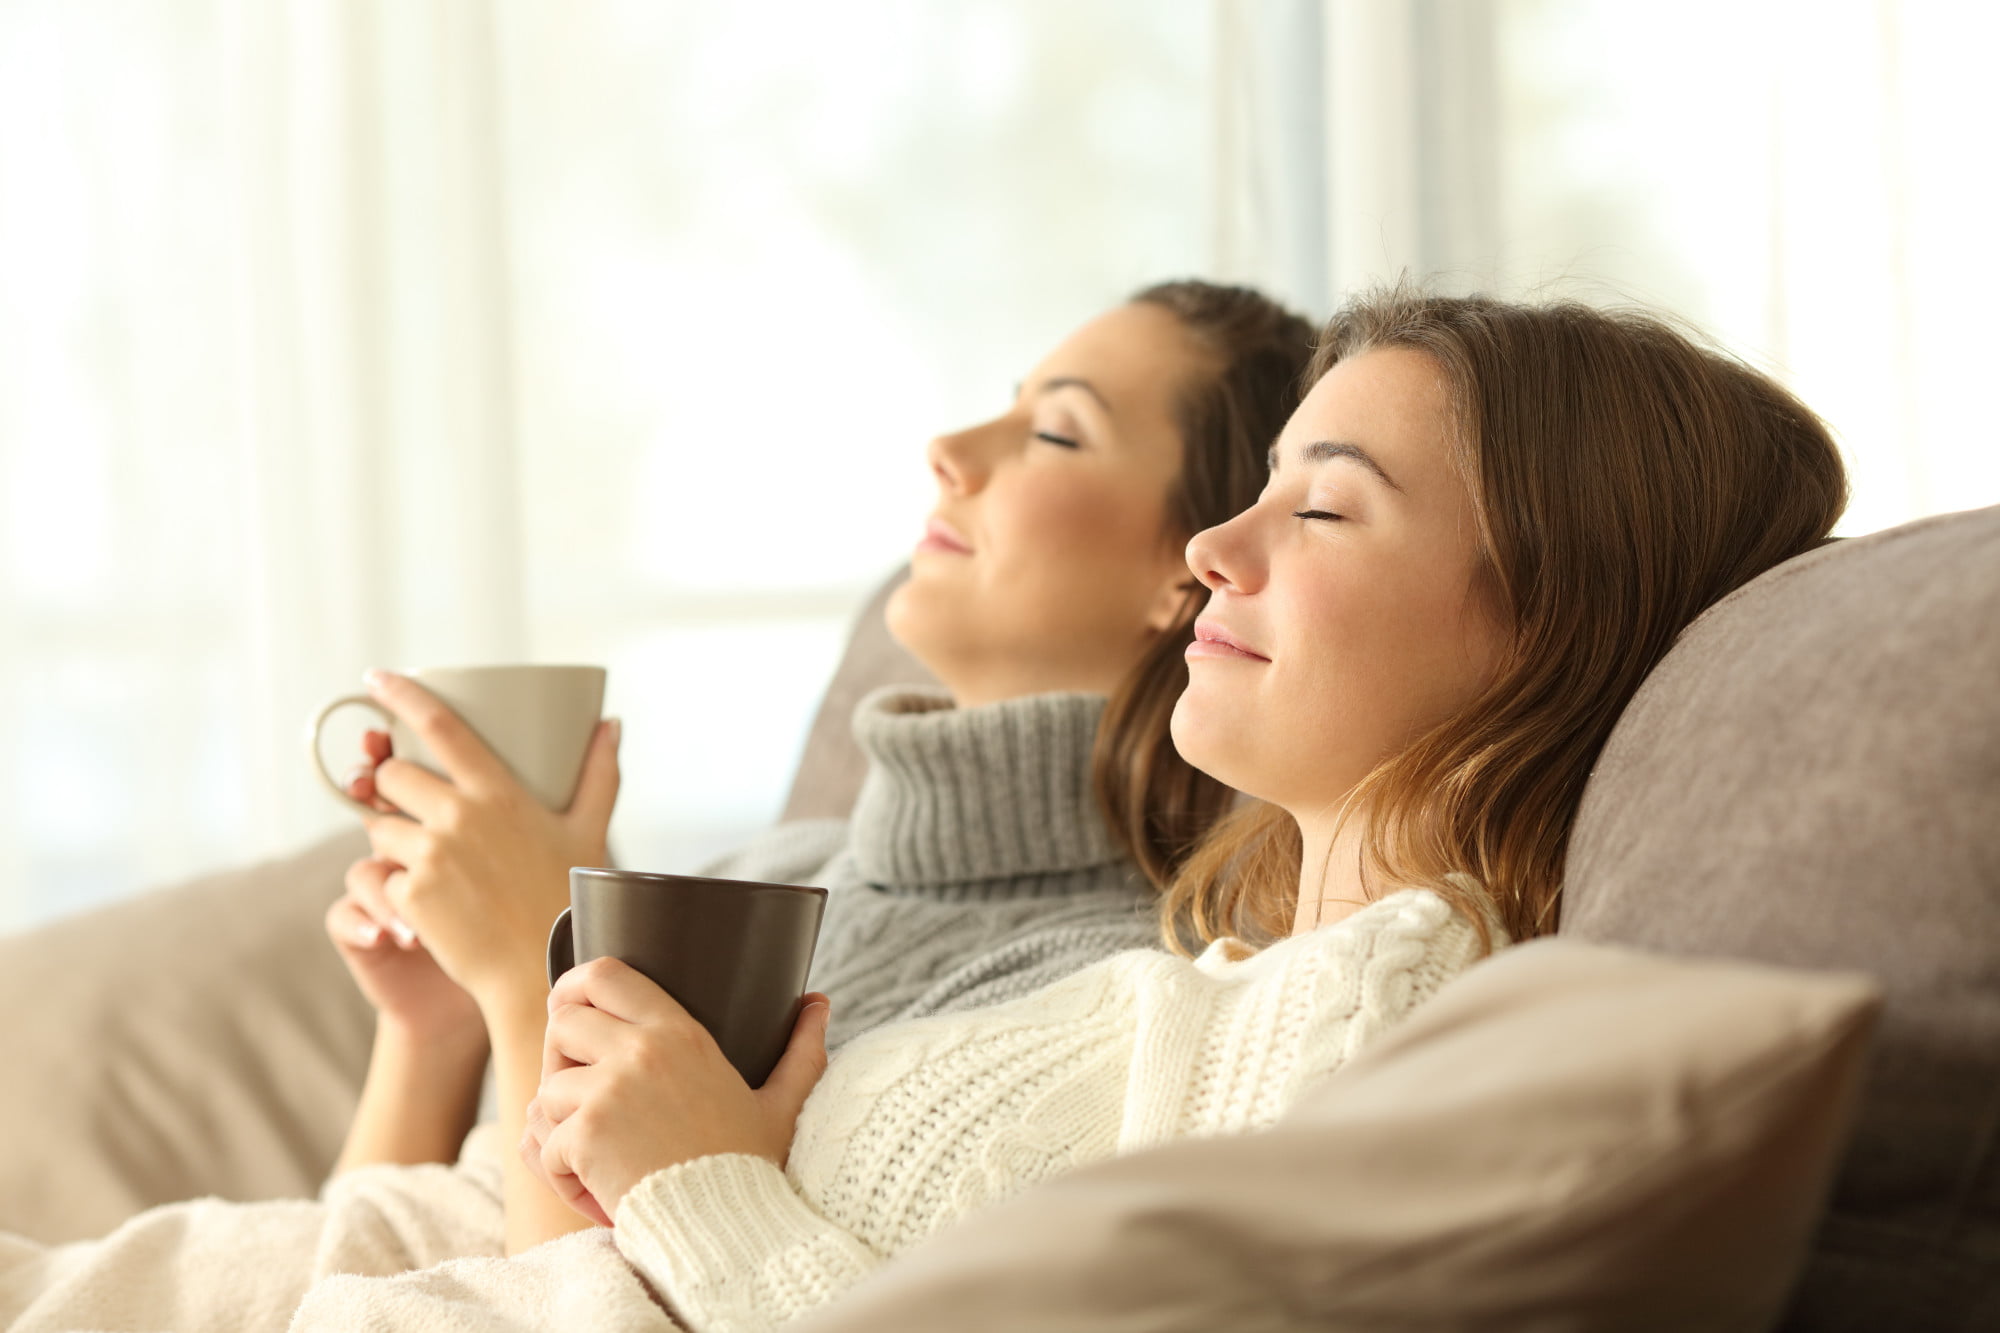 From ensuring your HVAC system is running optimally to sealing drafty windows, here's how to sustain toasty home heating all winter long.